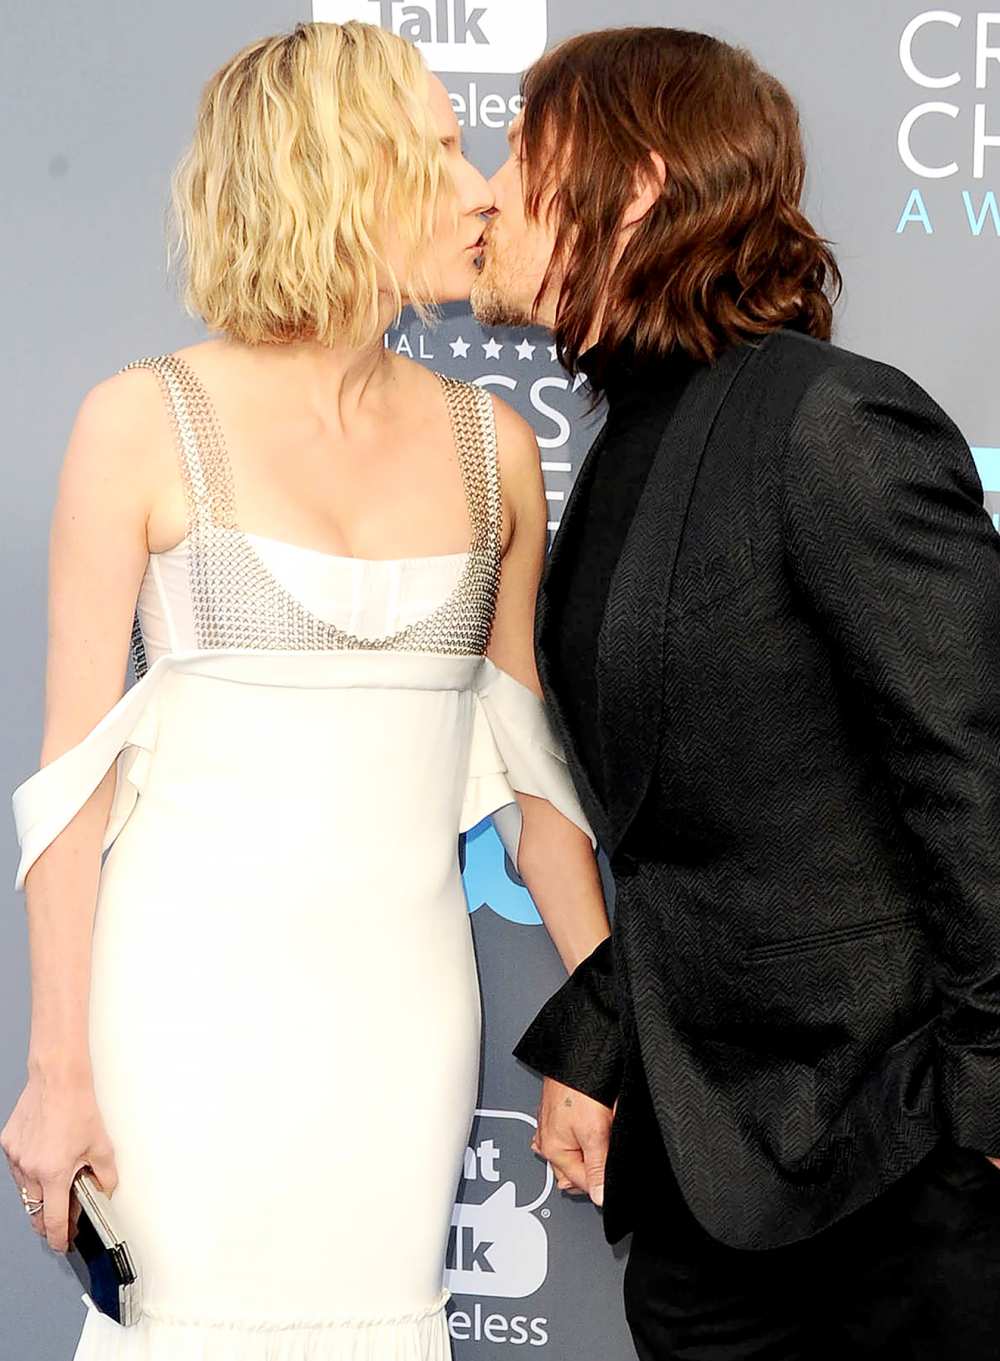 Diane Kruger and Norman Reedus Kiss